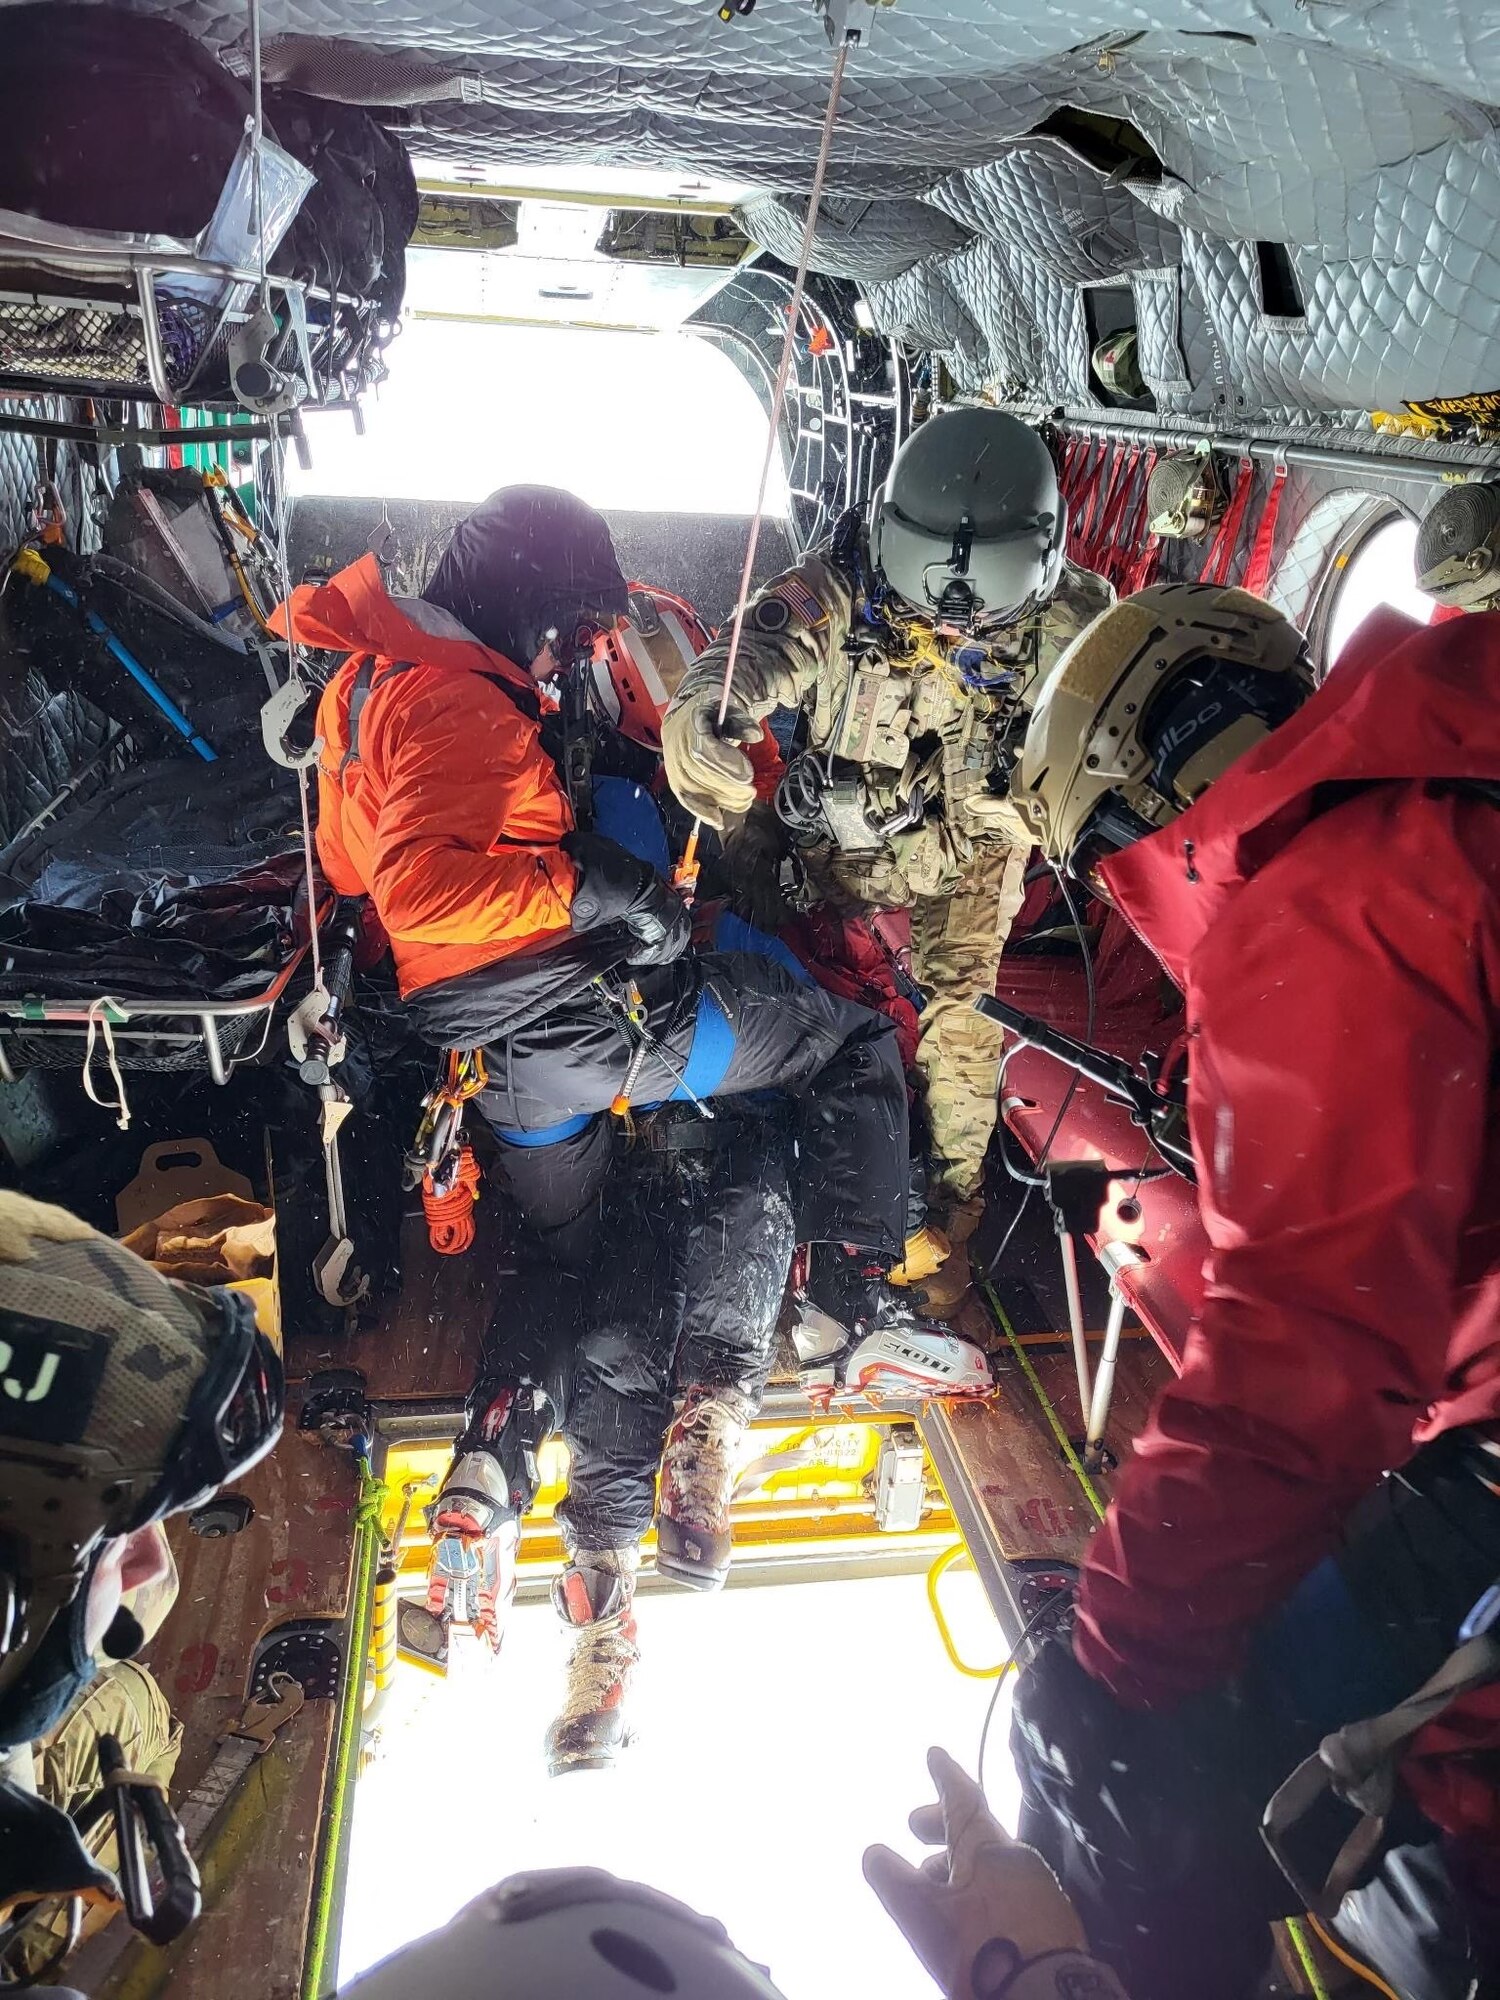 304th Rescue Squadron pararescuemen lift an injured climber into a CH-47 Chinook helicopter May 13, 2022 on Mount Rainier, Washington. The 304th RQS was called on to assist the National Park Service with rescuing two stranded climbers from the mountain. (Courtesy photo)